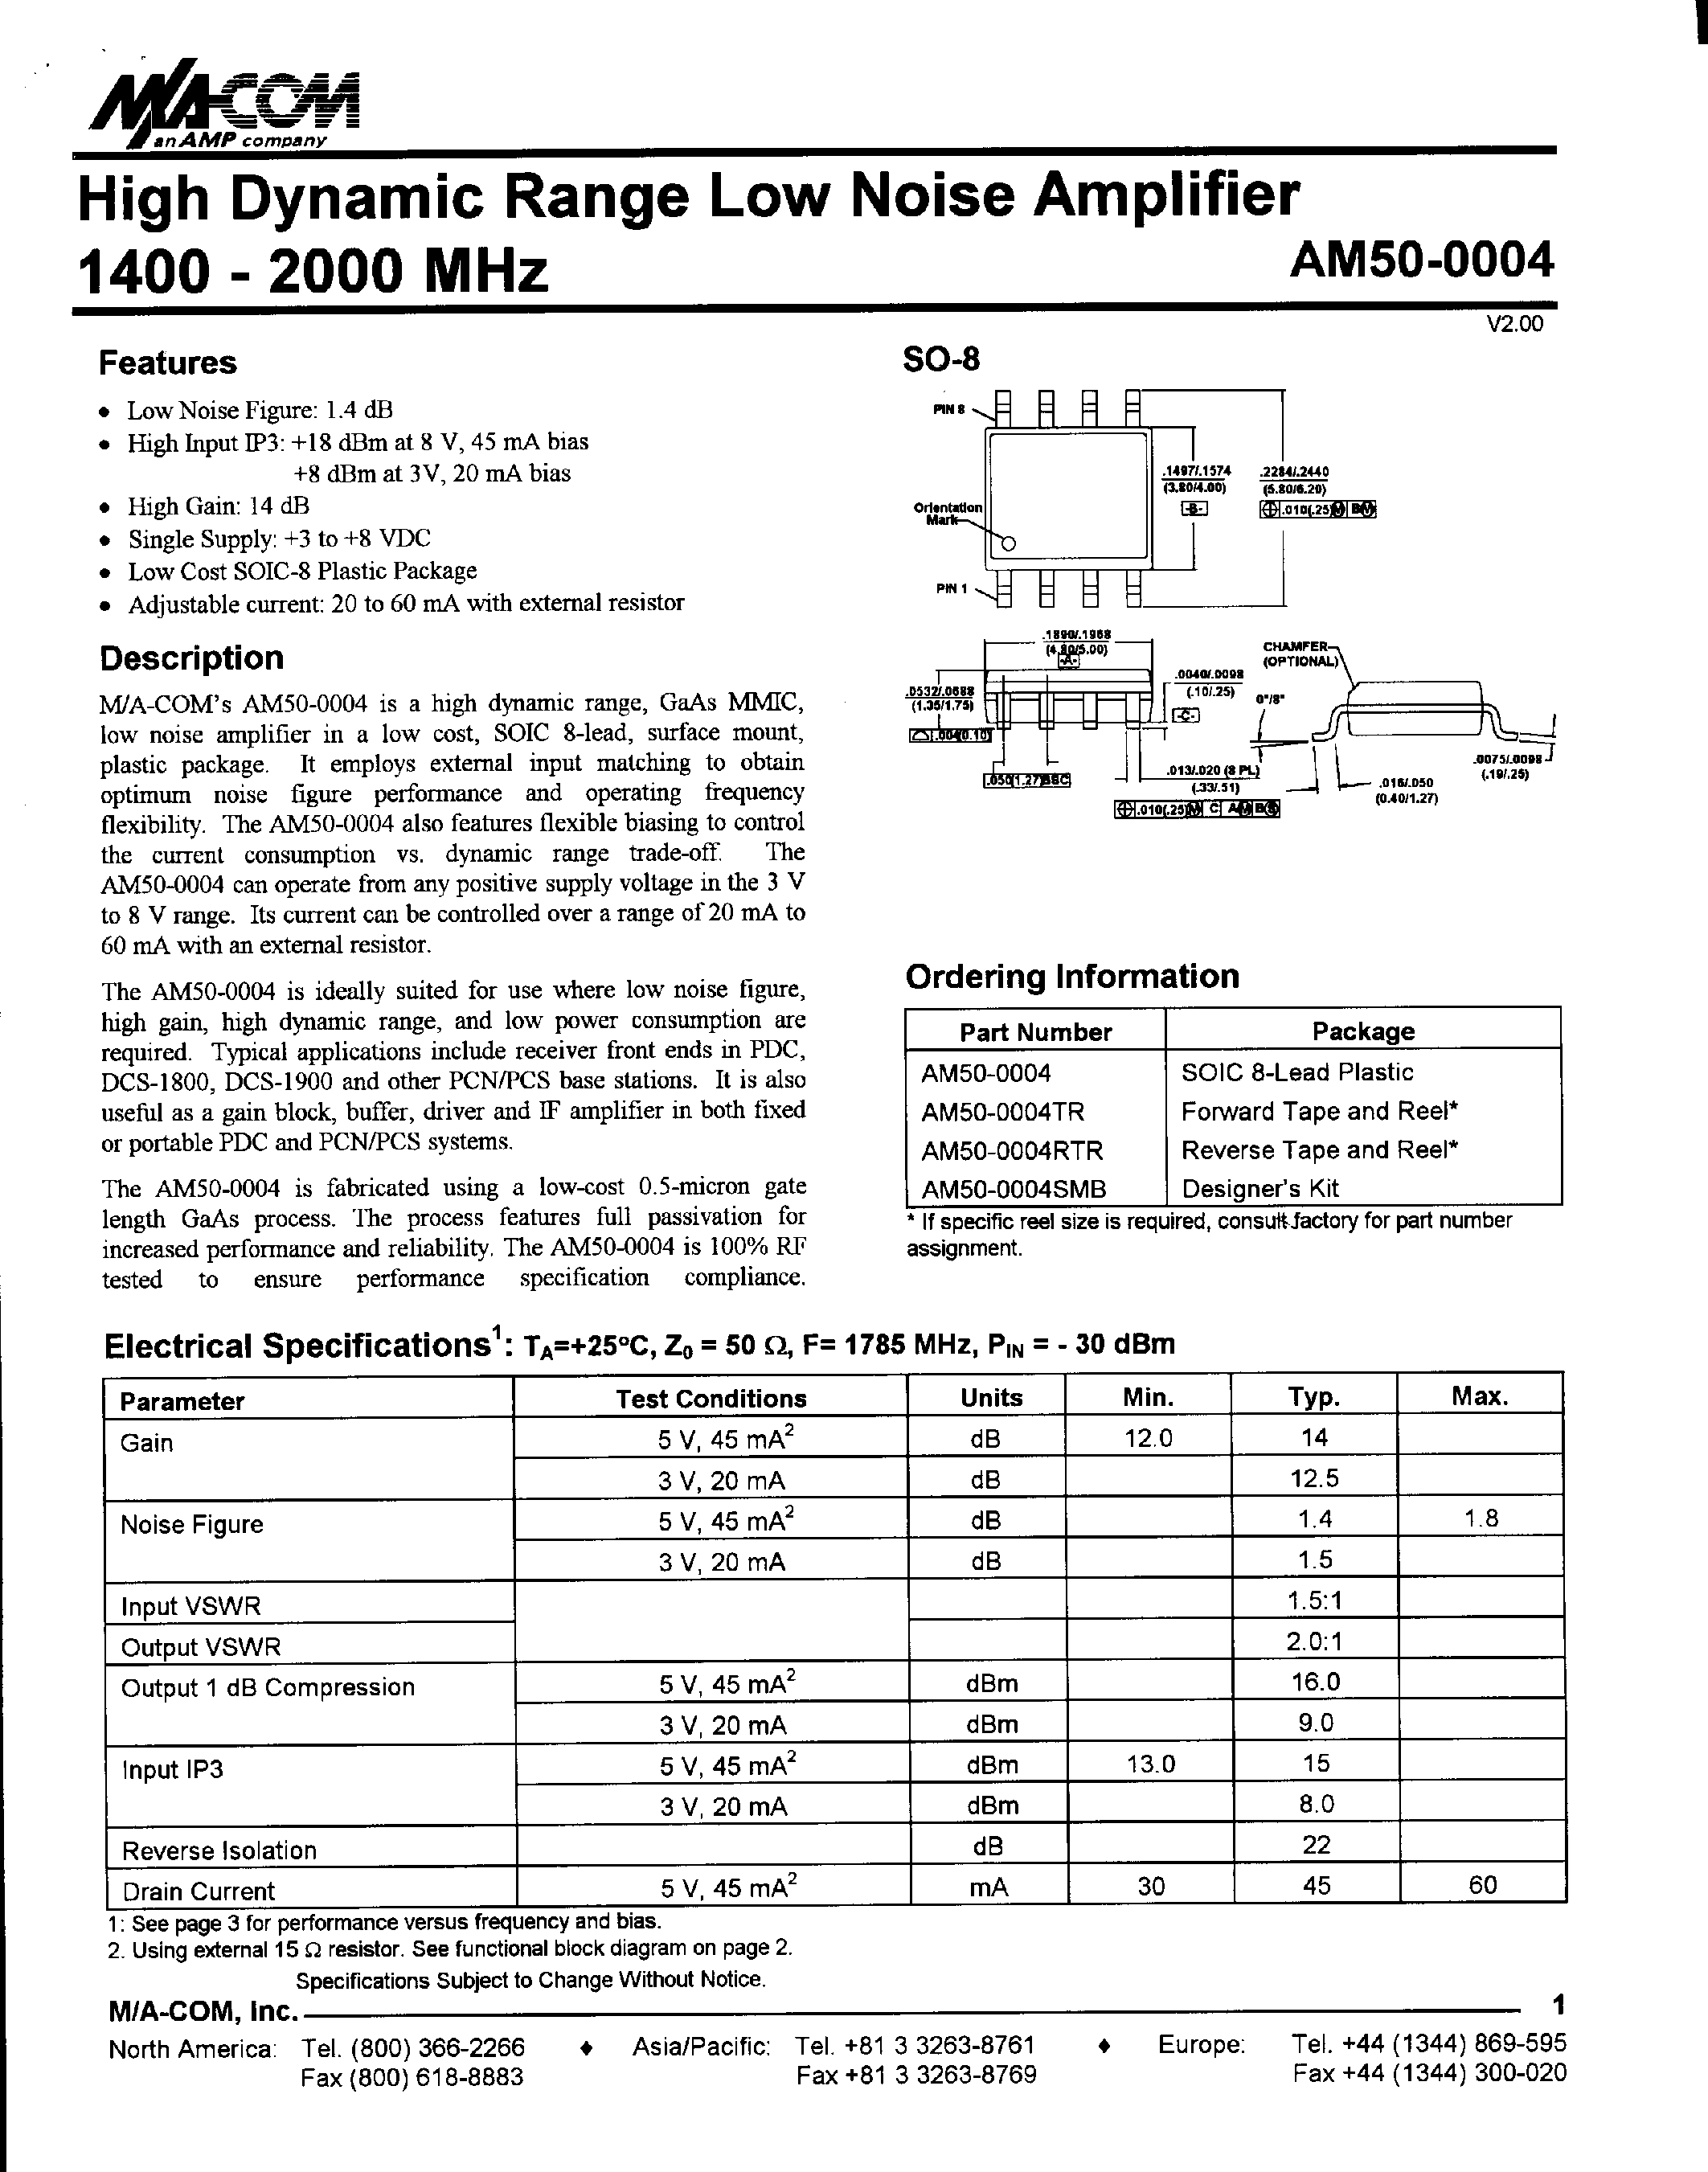 Datasheet AM50-0004TR - High Dynamic Range Low Noise Amplifier 1400-2000 MHz page 1